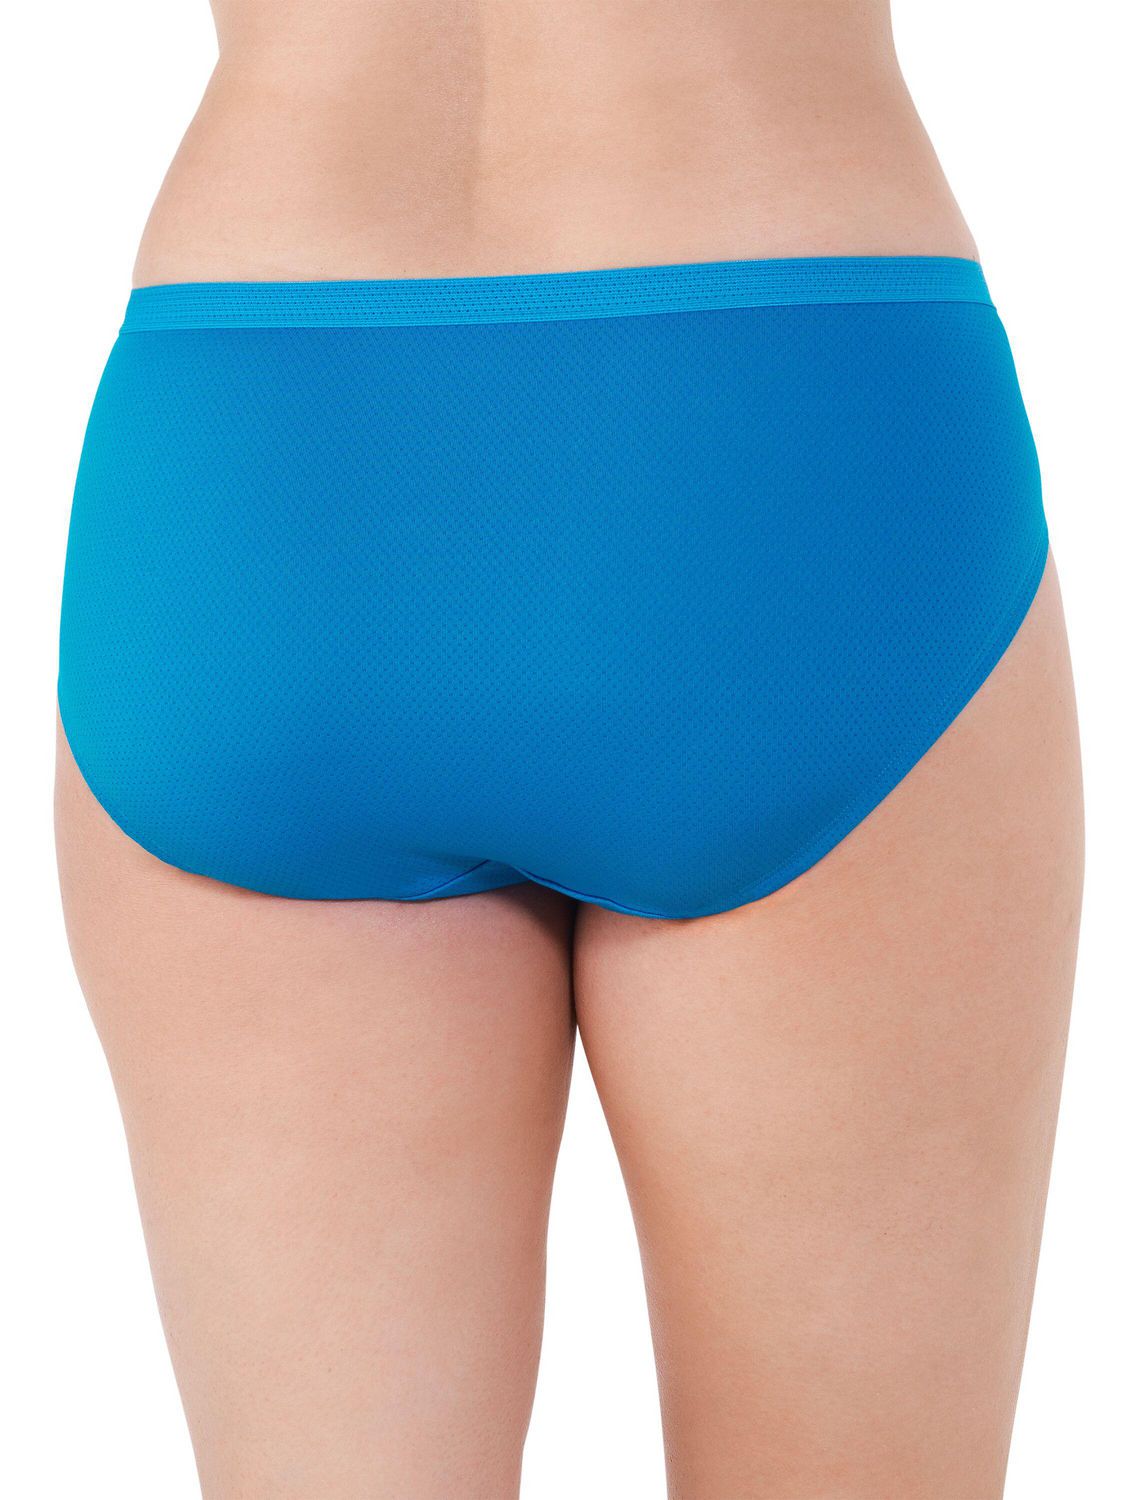 Fruit of the Loom Women's Fit for Me Plus Size Underwear, Designed